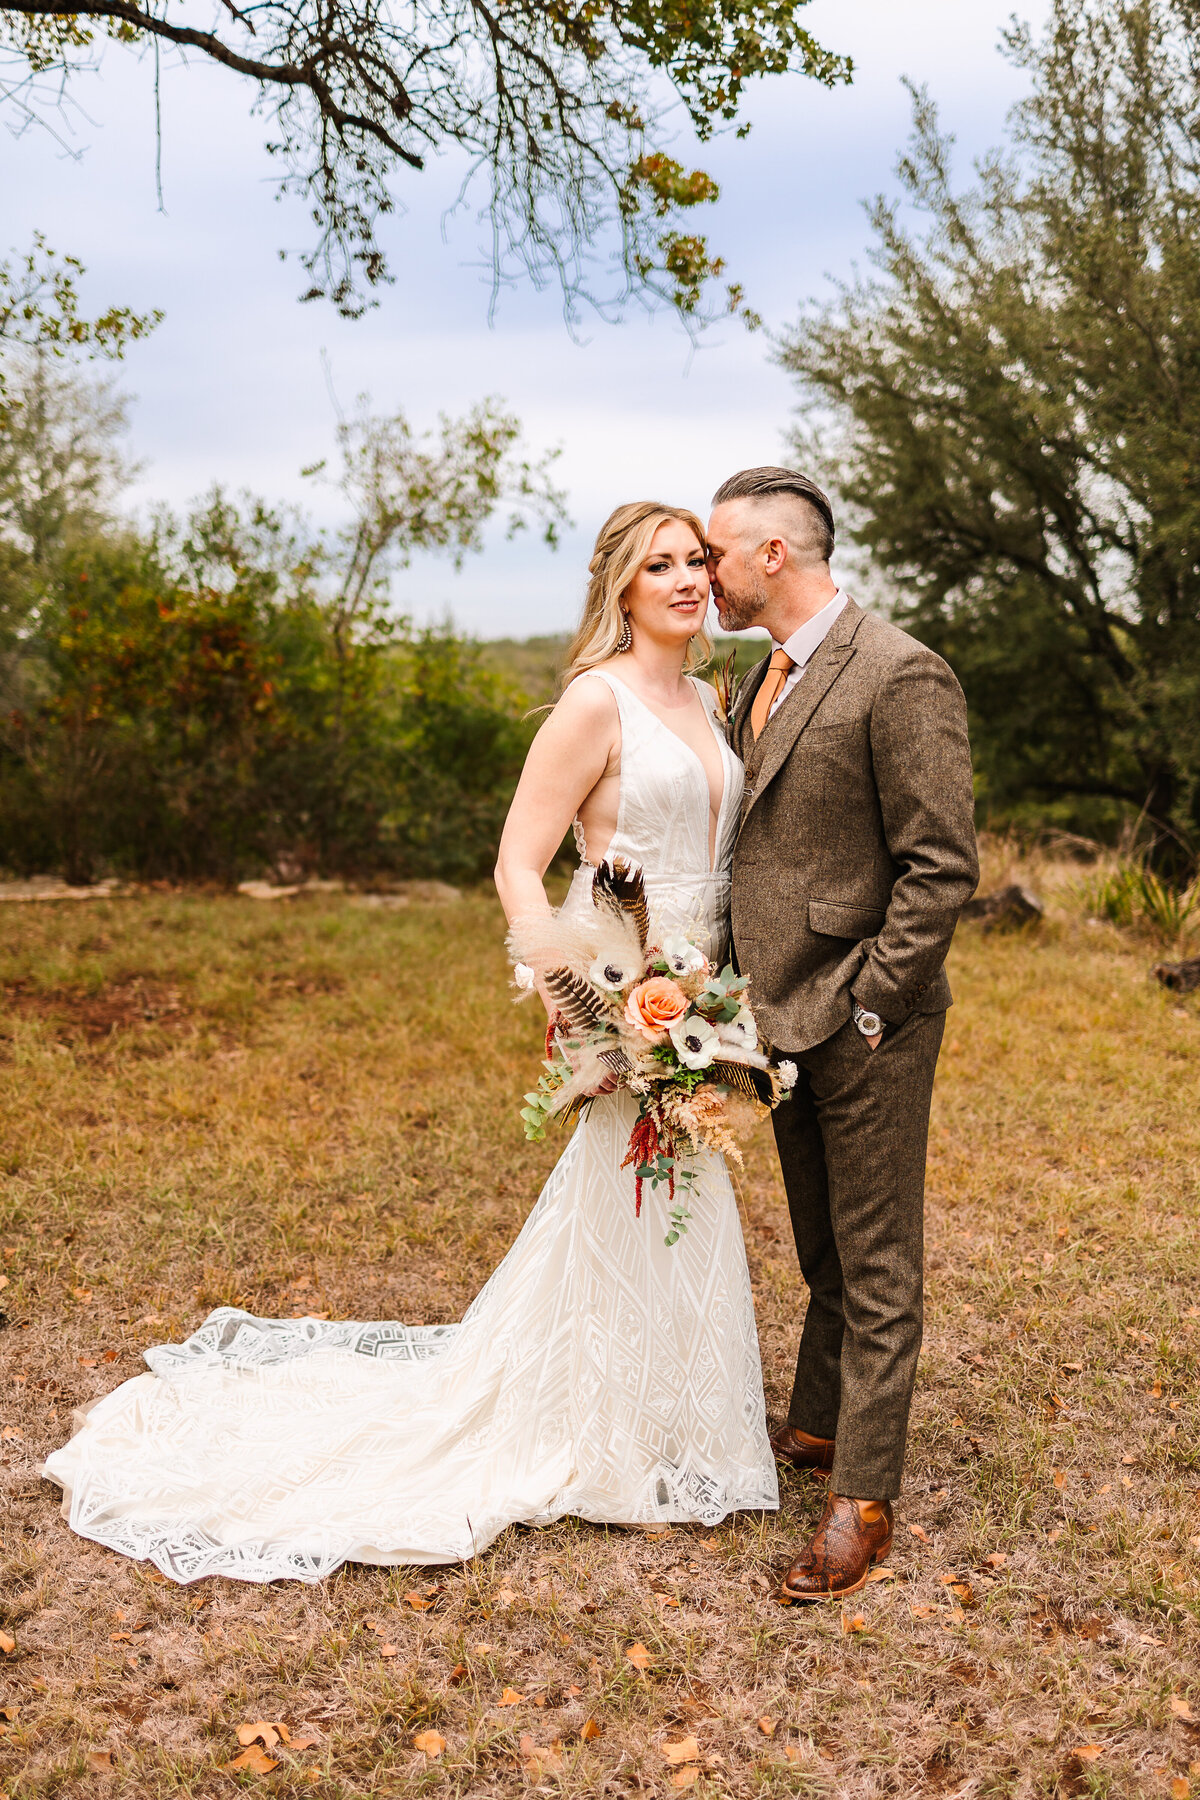 Immerse in a boho extravaganza at Vista West Ranch. An untraditional wedding in Dripping Springs, Texas, where epic parties, boho chic vibes, and vibrant celebrations unfold.